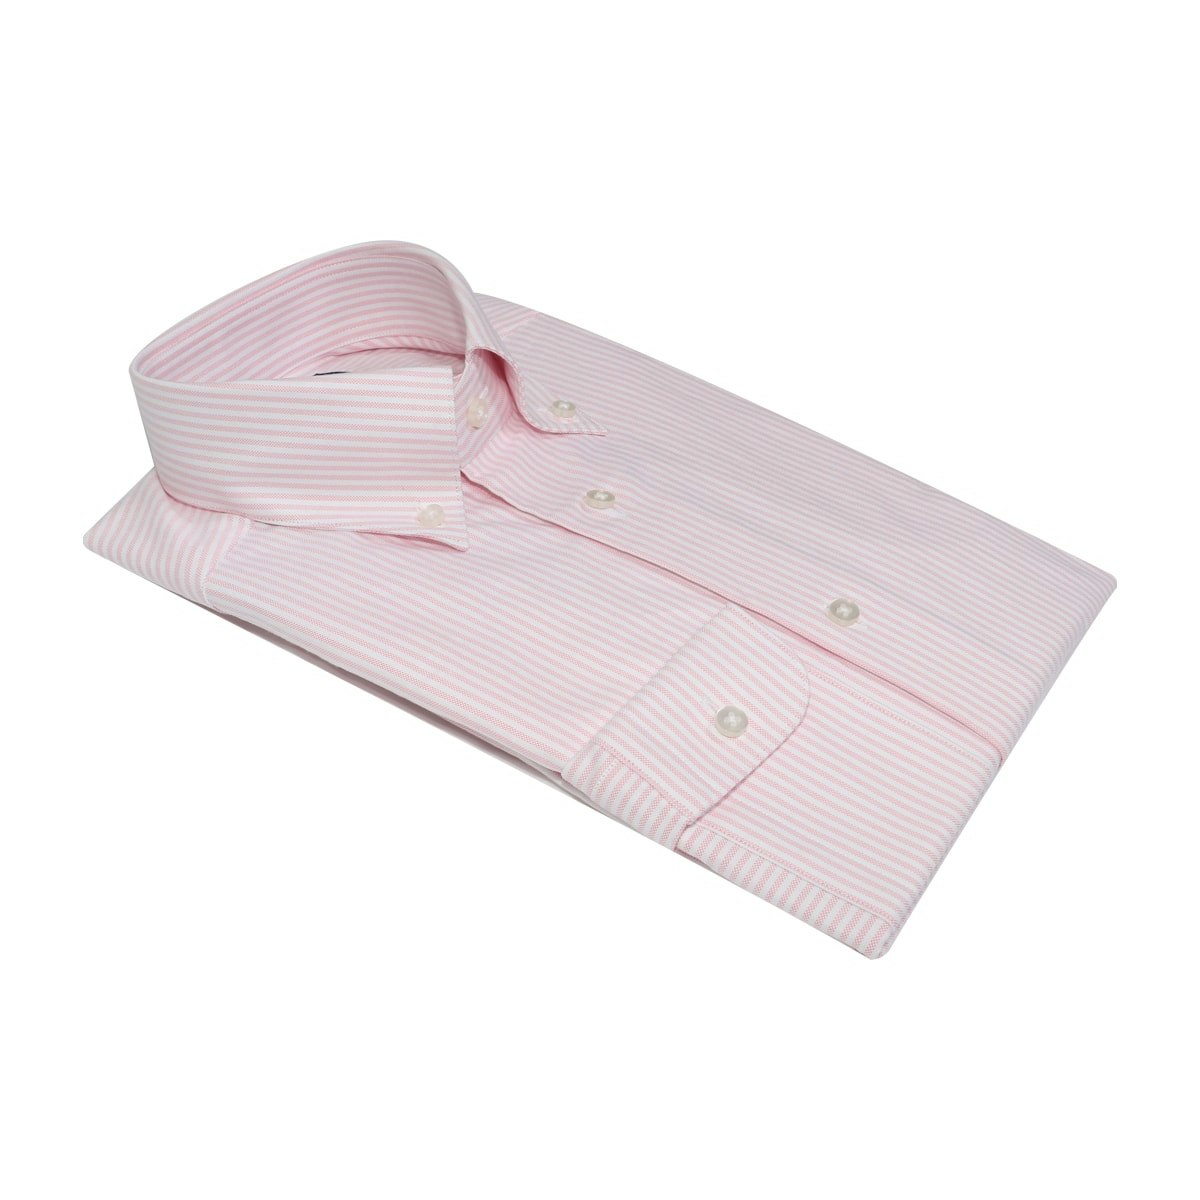 InStitchu Collection Oxford Pink Cotton Striped